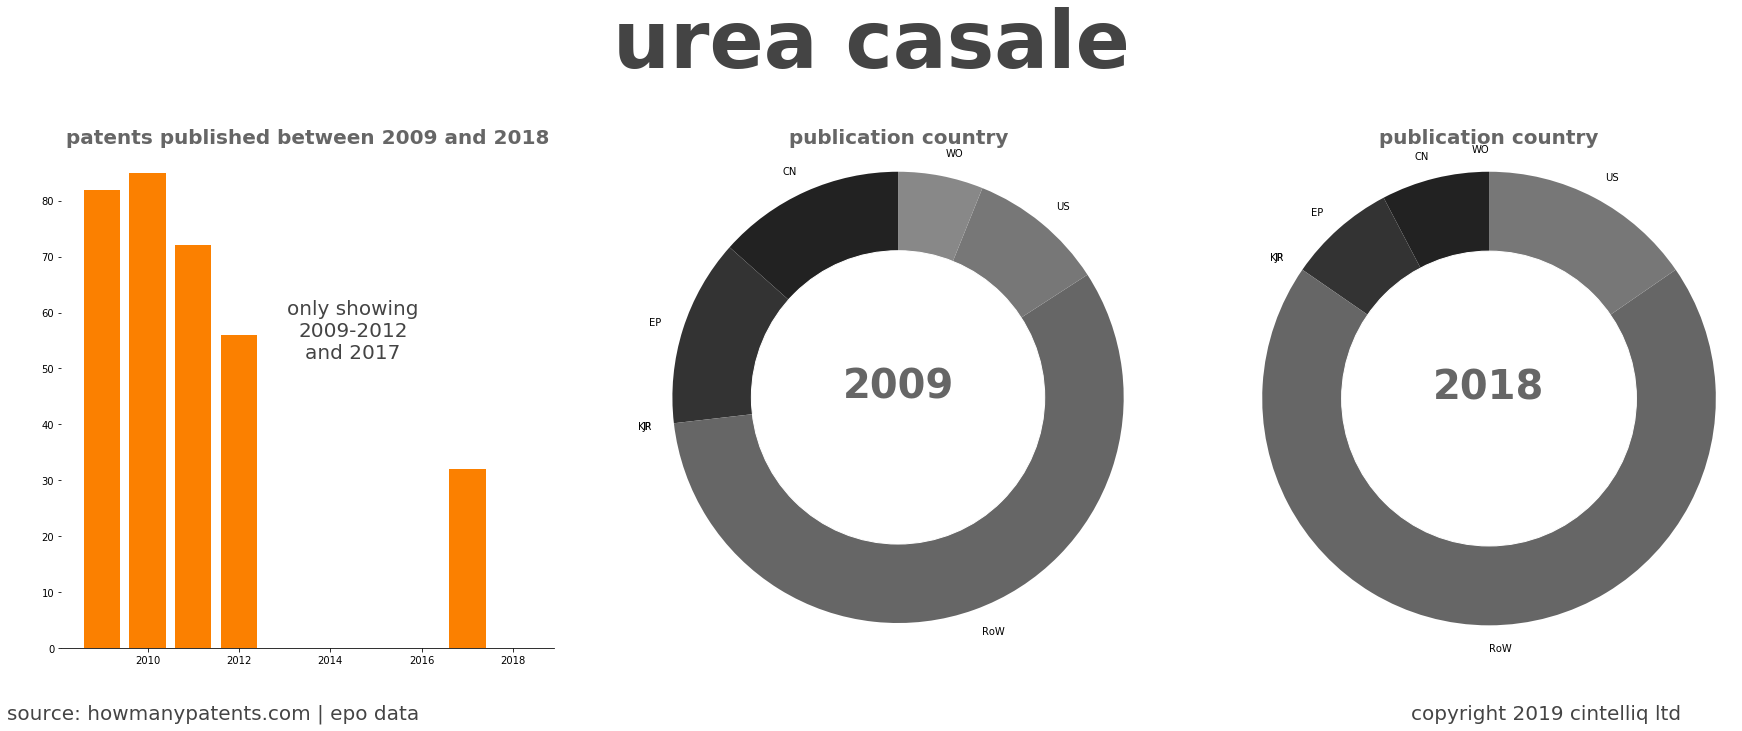 summary of patents for Urea Casale